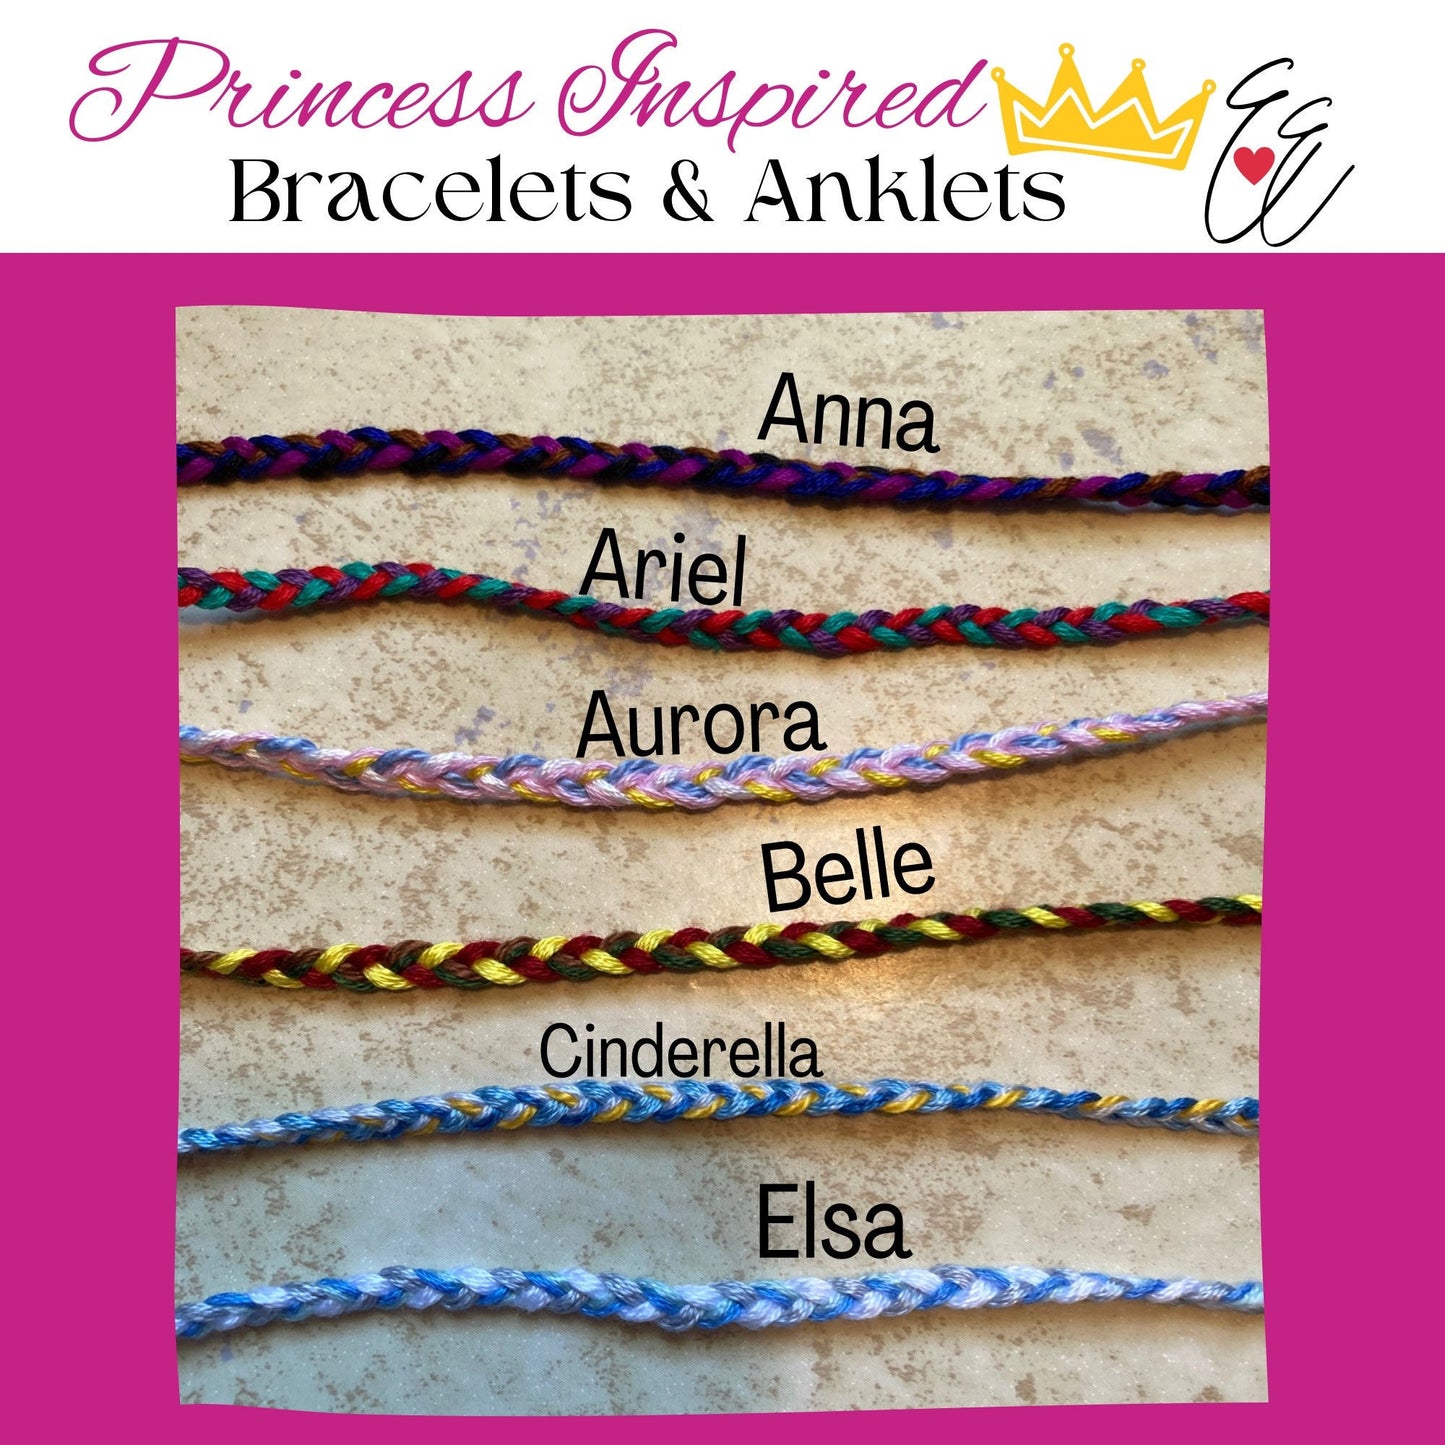 Princess Inspired Thread Braided Friendship Bracelets and Anklets